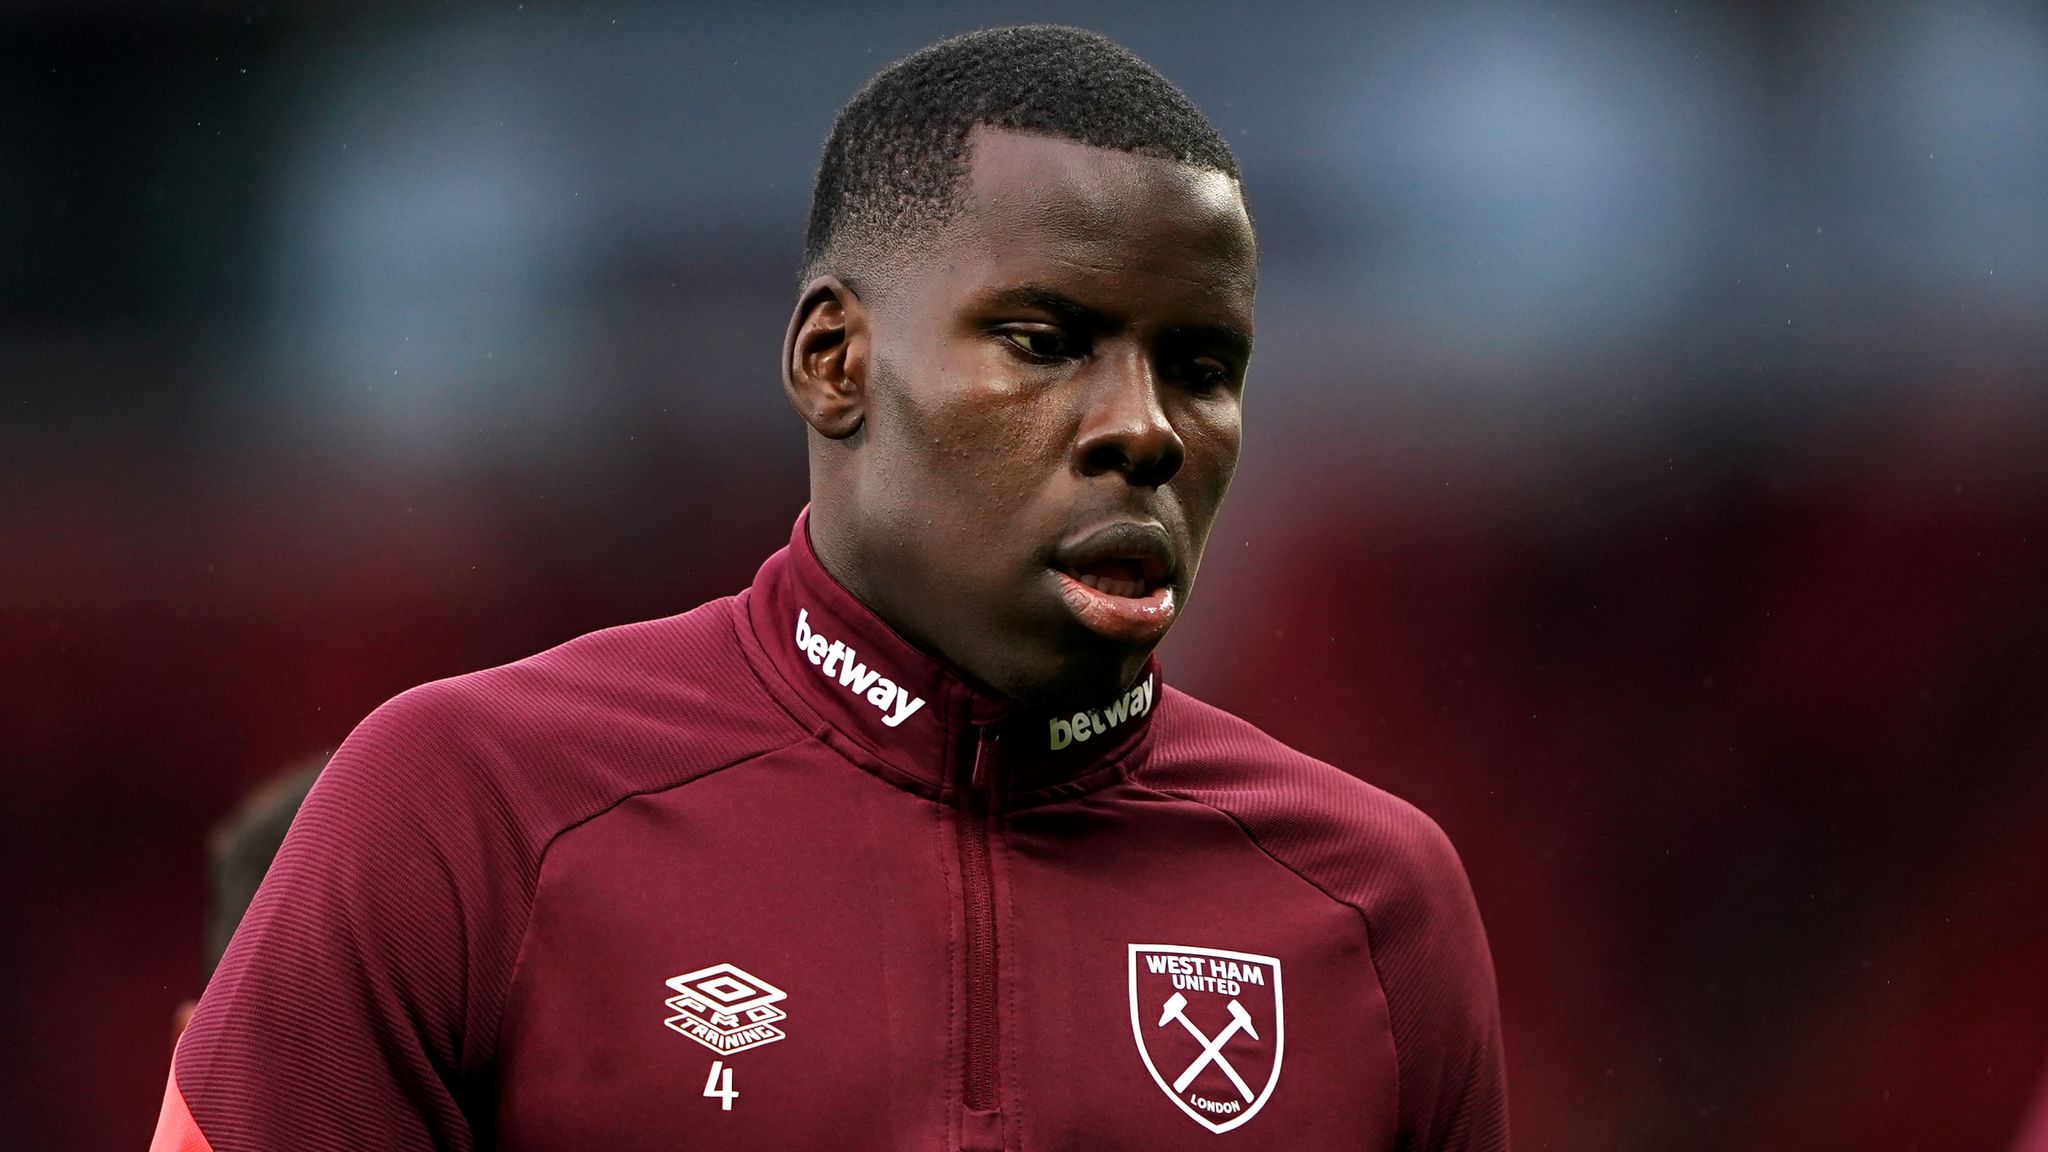 West ham defender Kurt Zouma has issued an apology after a video emerged of him kicking and hitting a cat